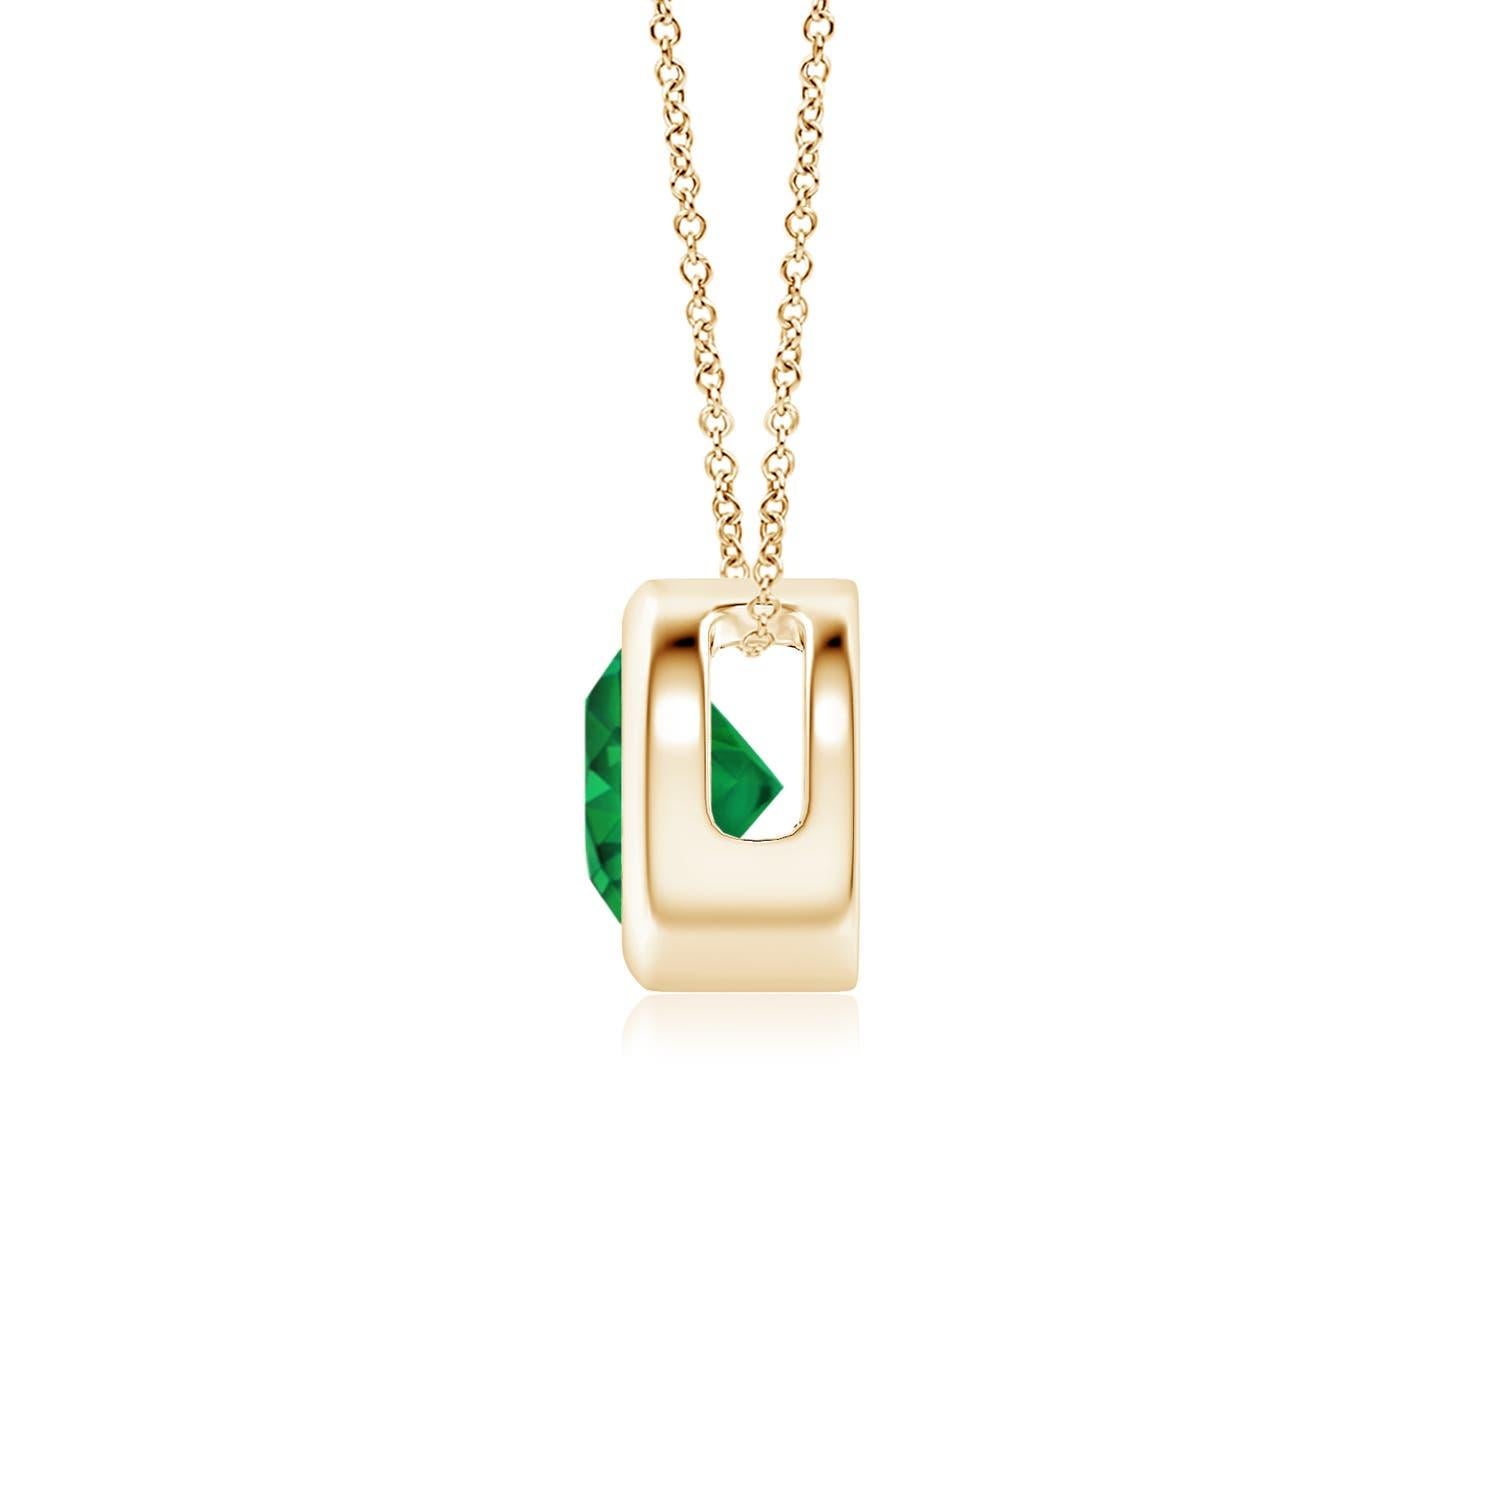 This classic solitaire emerald pendant's beautiful design makes the center stone appear like it's floating on the chain. The lush green emerald is secured in a bezel setting. Crafted in 14k yellow gold, this round emerald pendant is simple yet